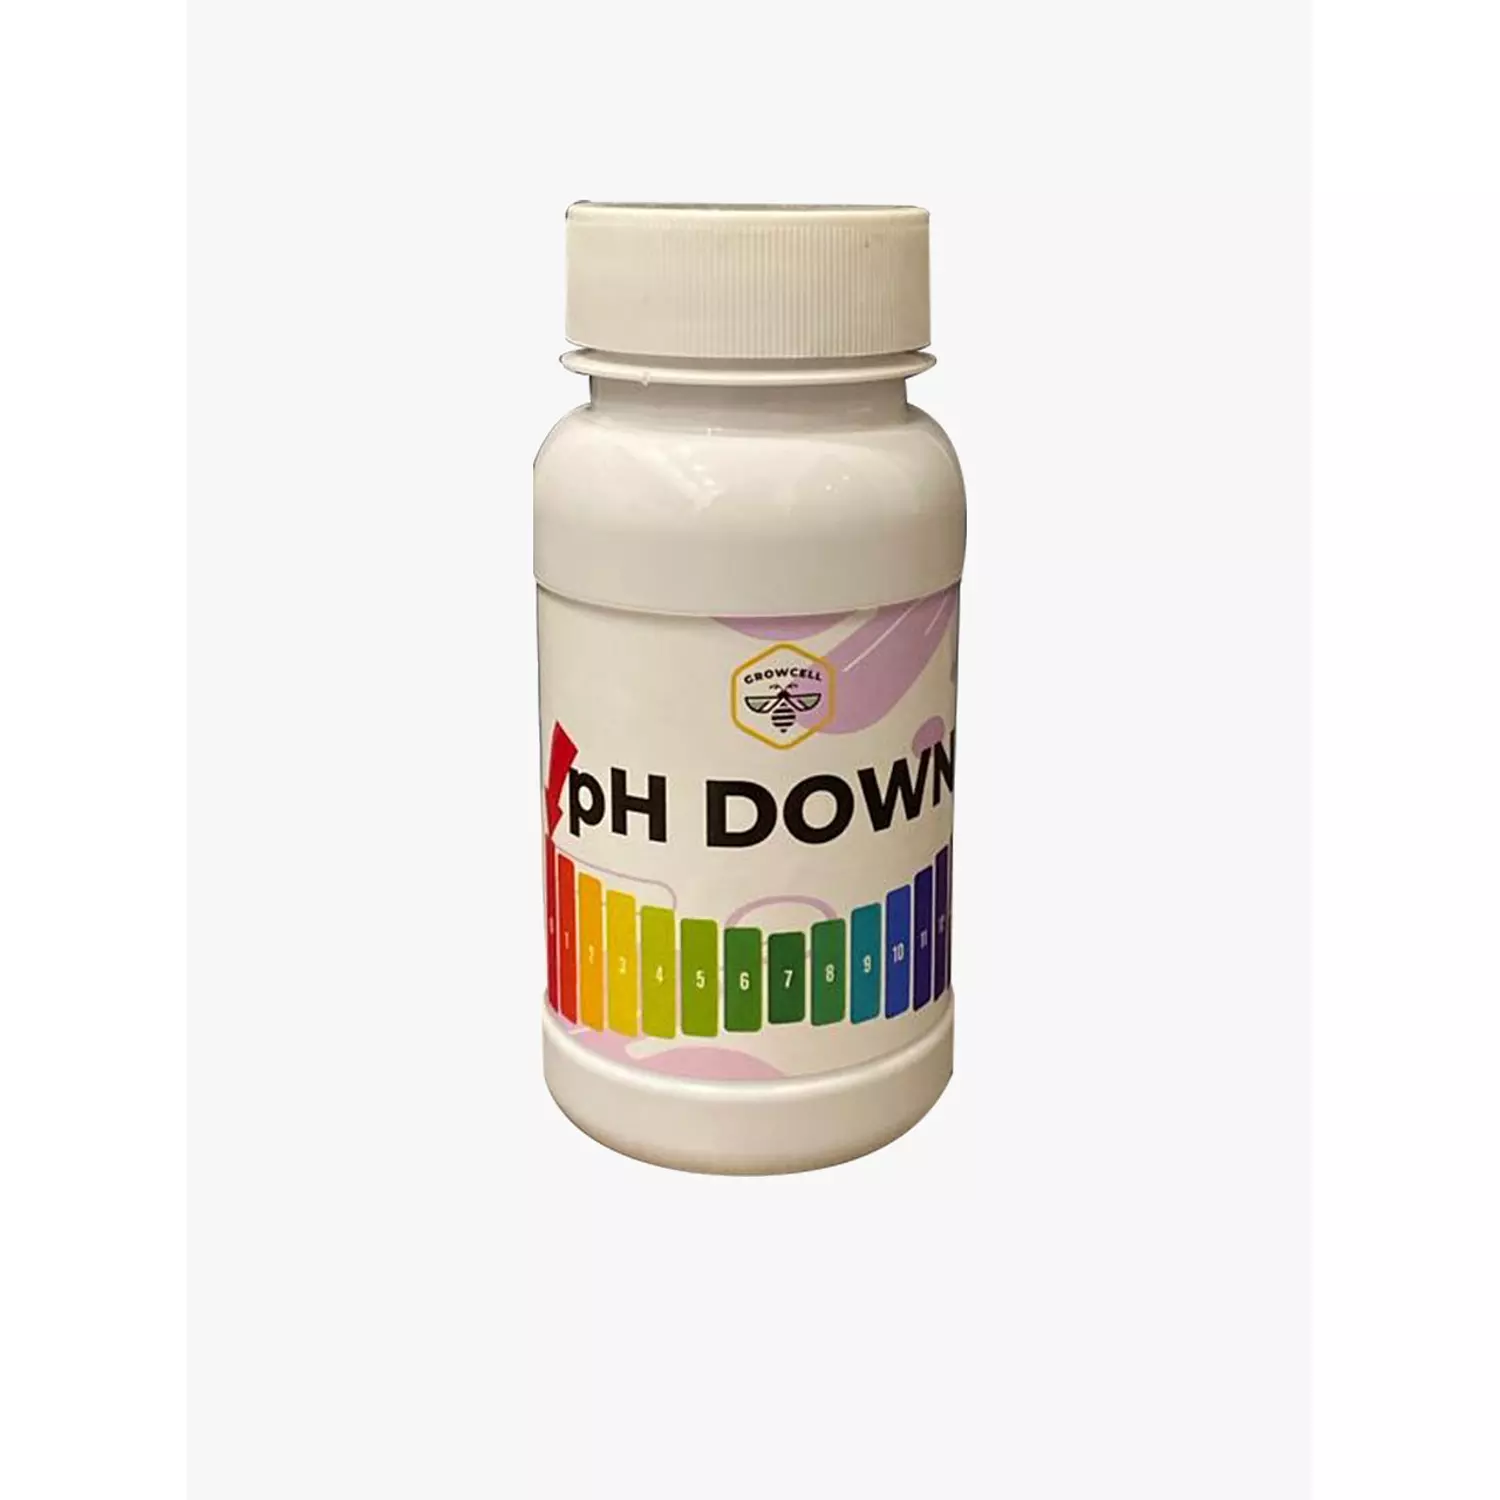 pH down hover image